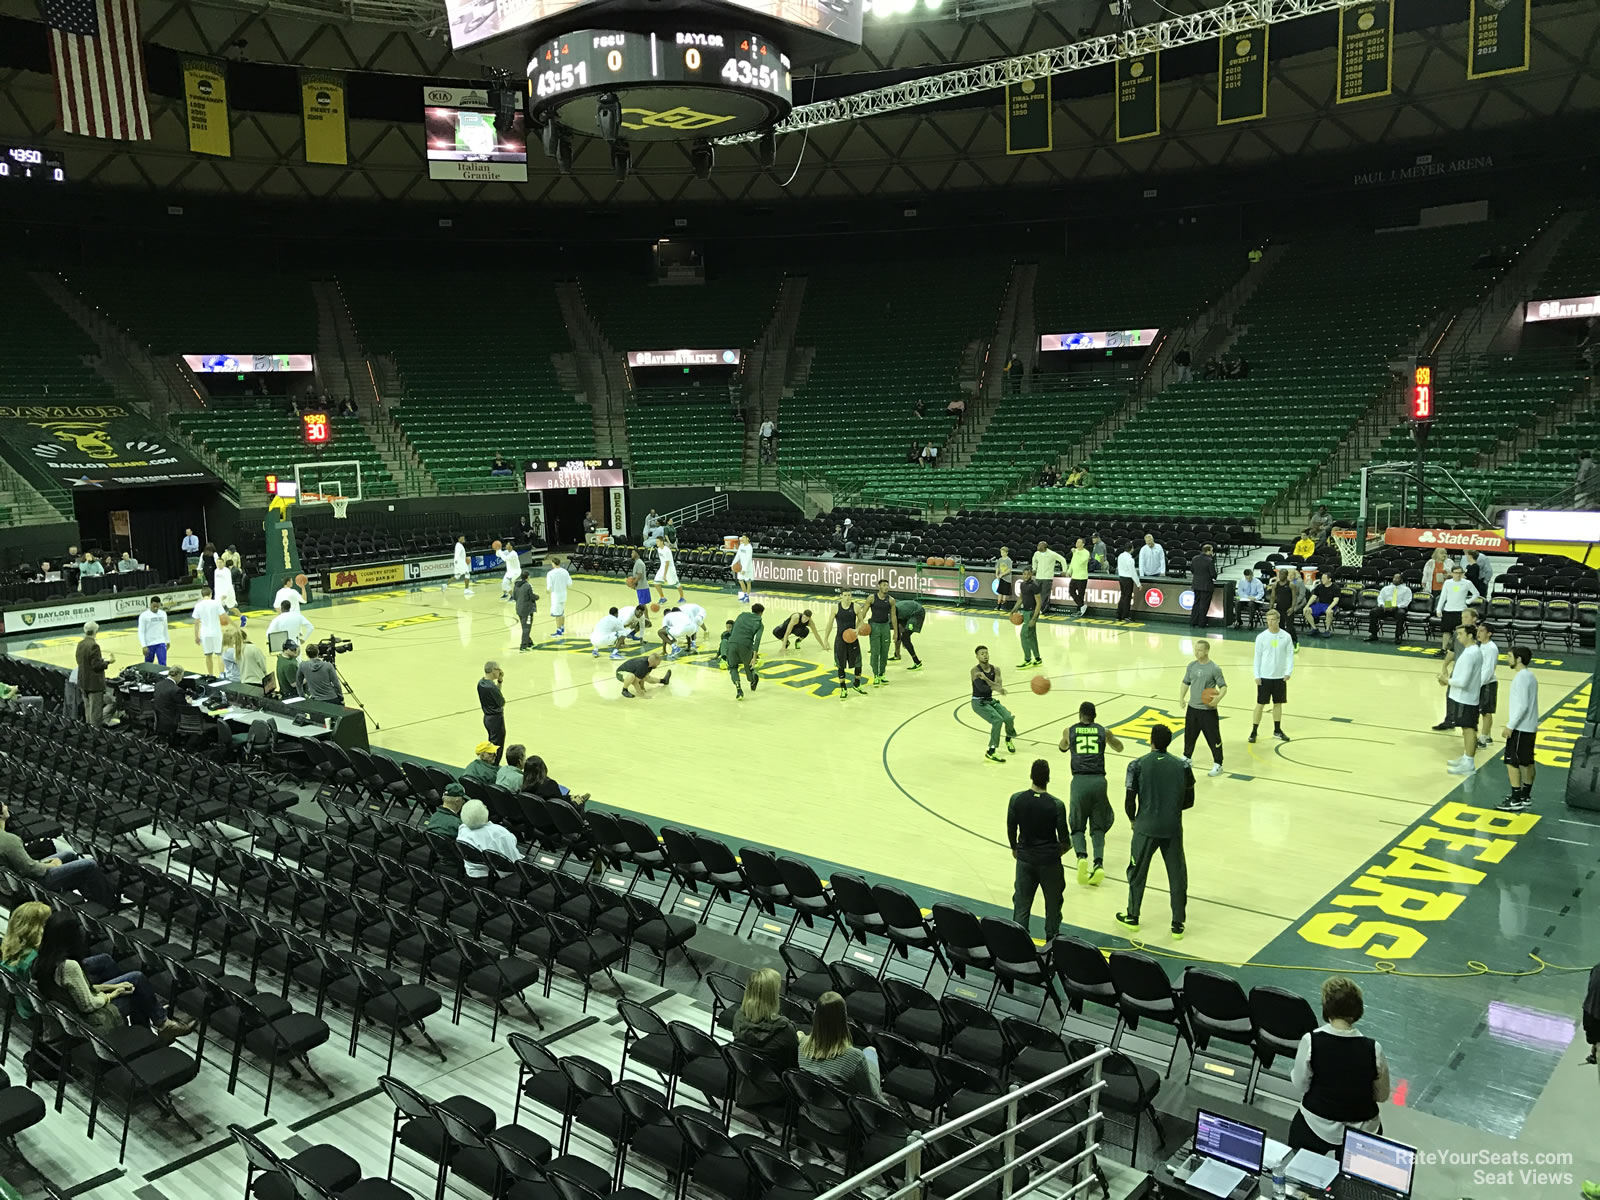 section 122, row 10 seat view  - ferrell center